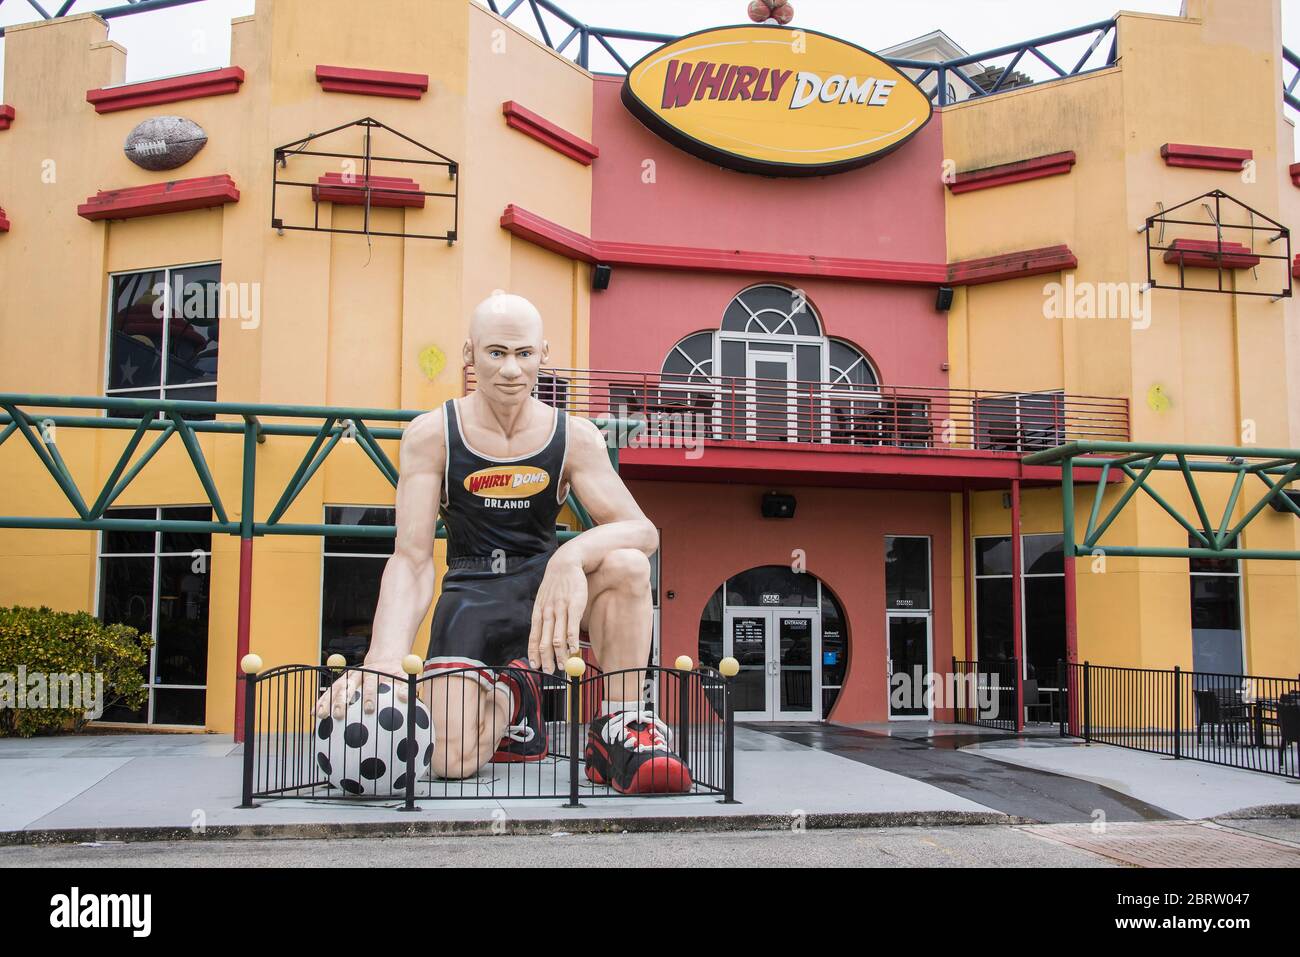 Large model of sportsman outside former Whirly Dome attraction at International Drive, Orlando, Florida. Stock Photo